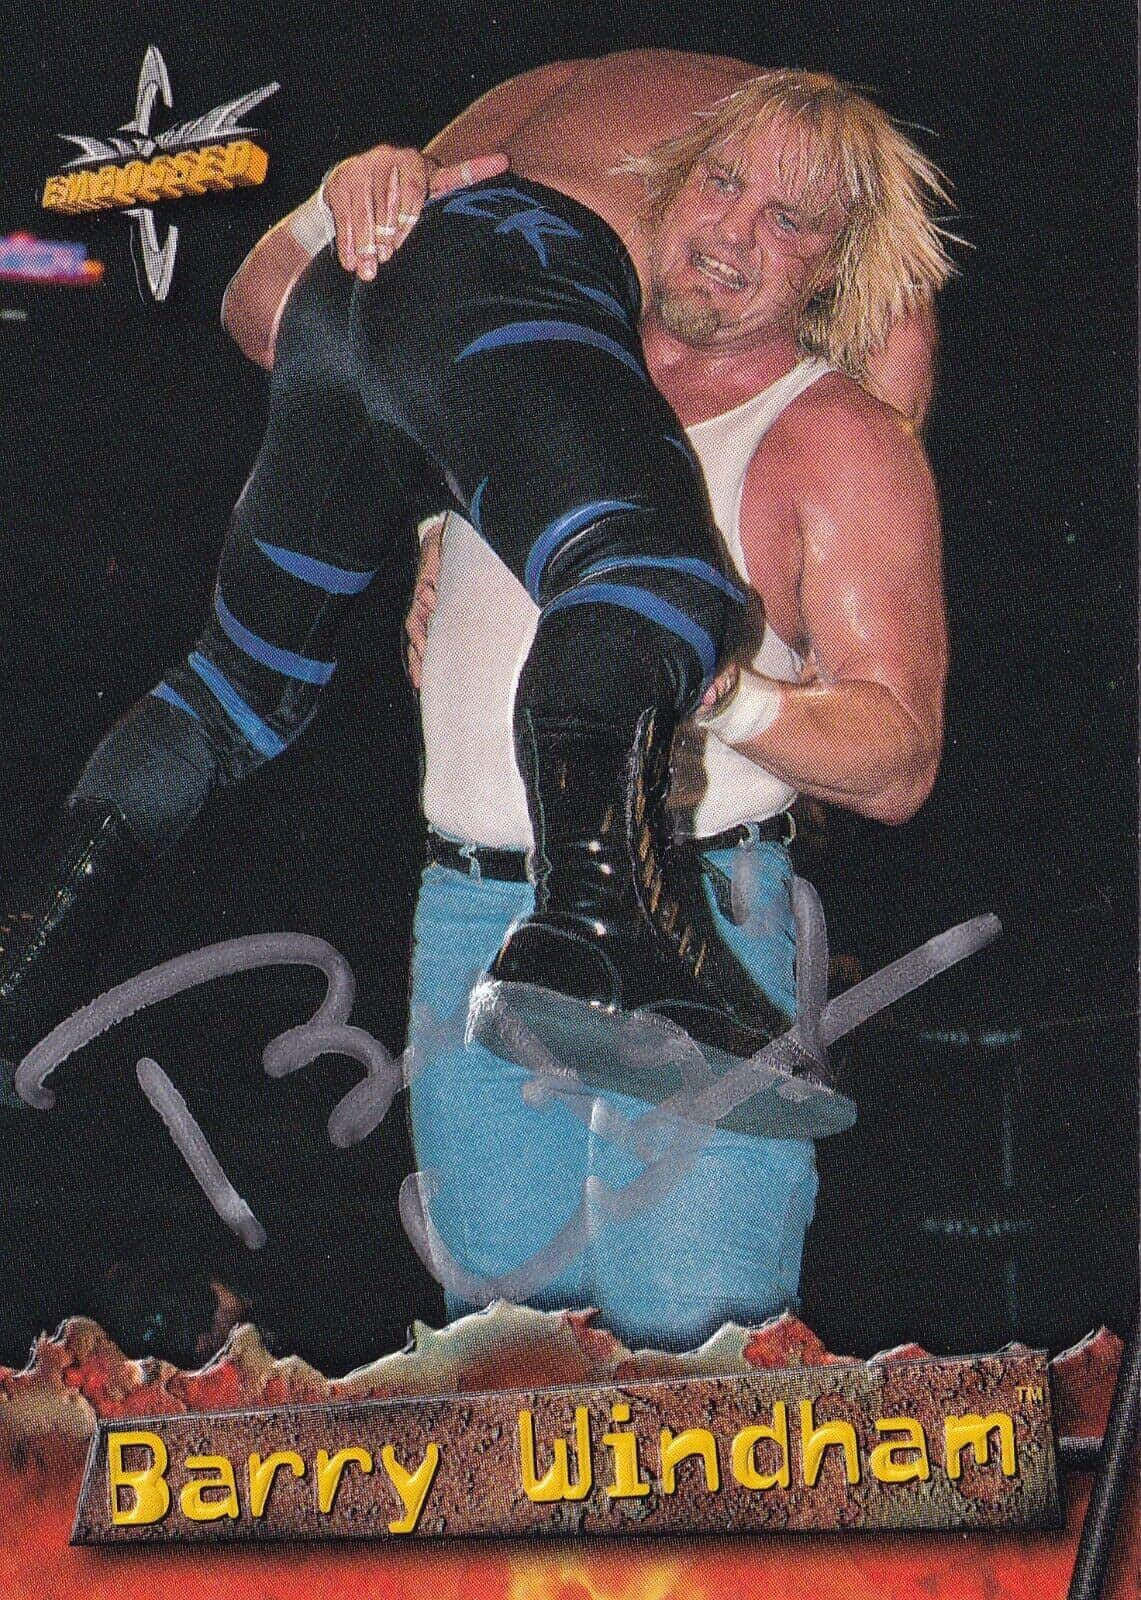 Barry Windham Carrying Man Wallpaper